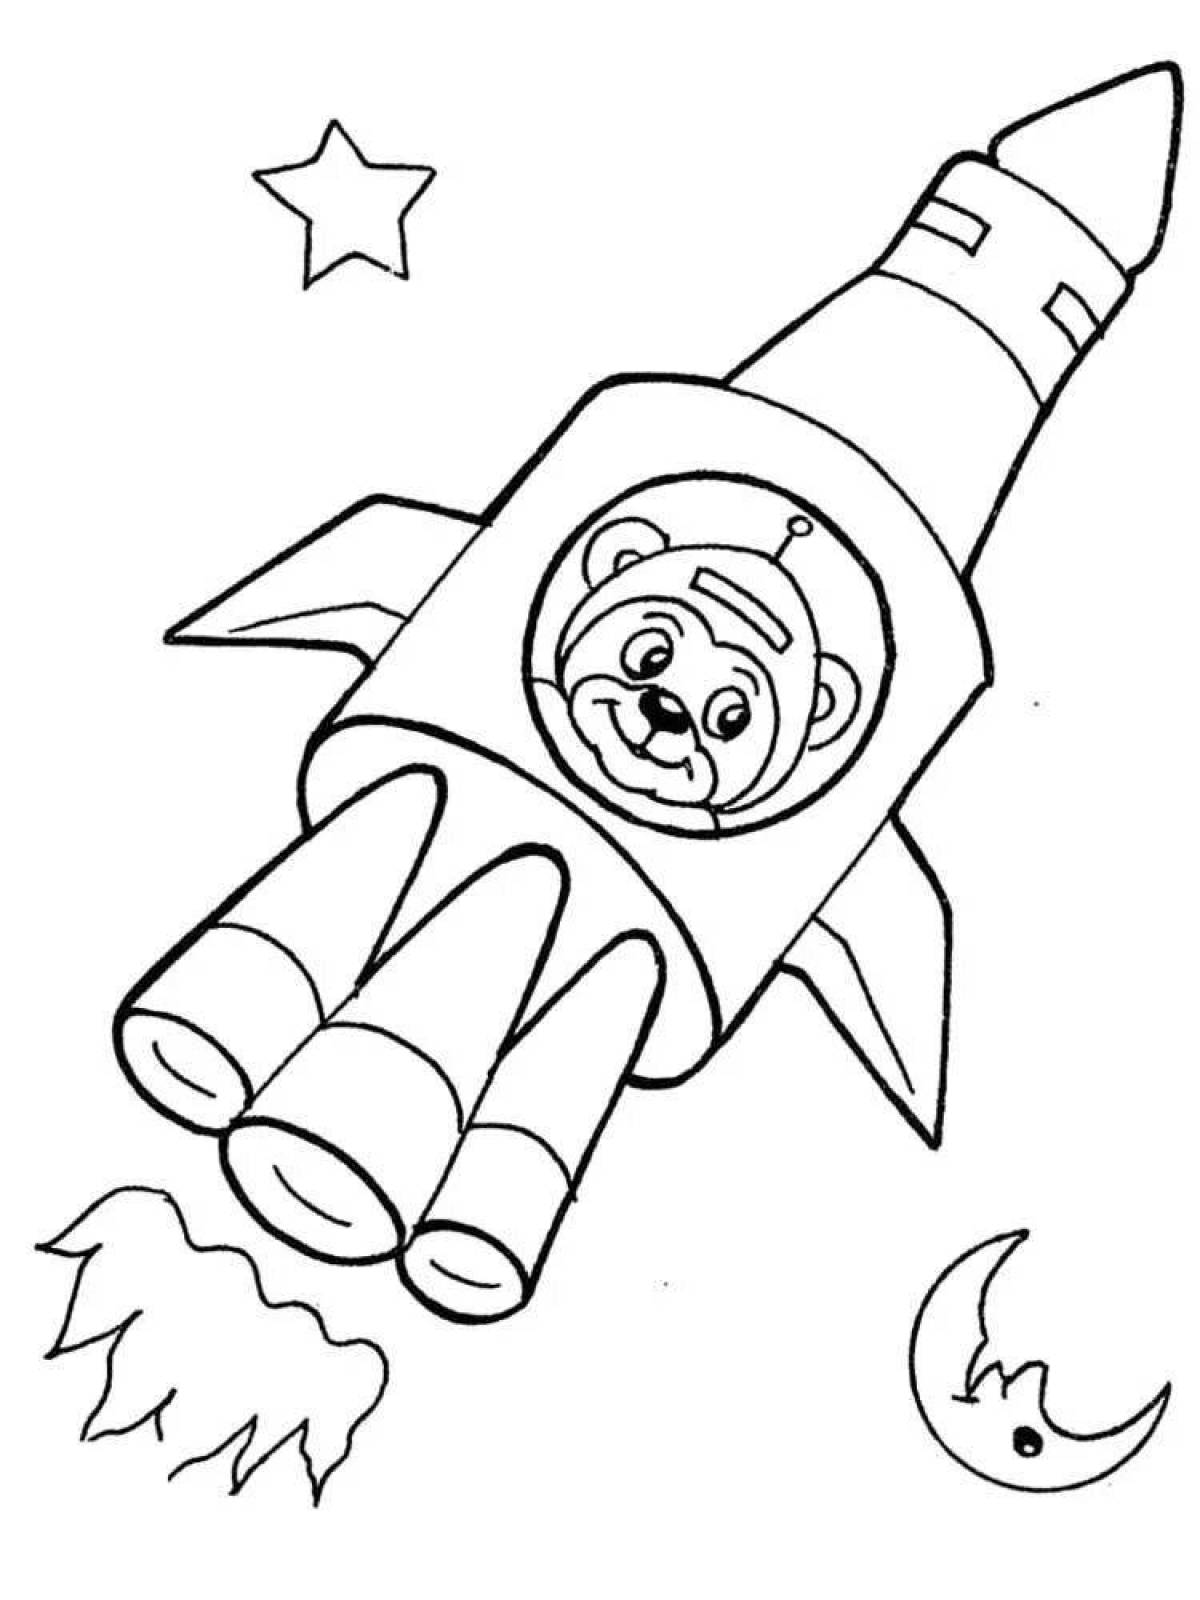 Attractive rocket coloring book for kids